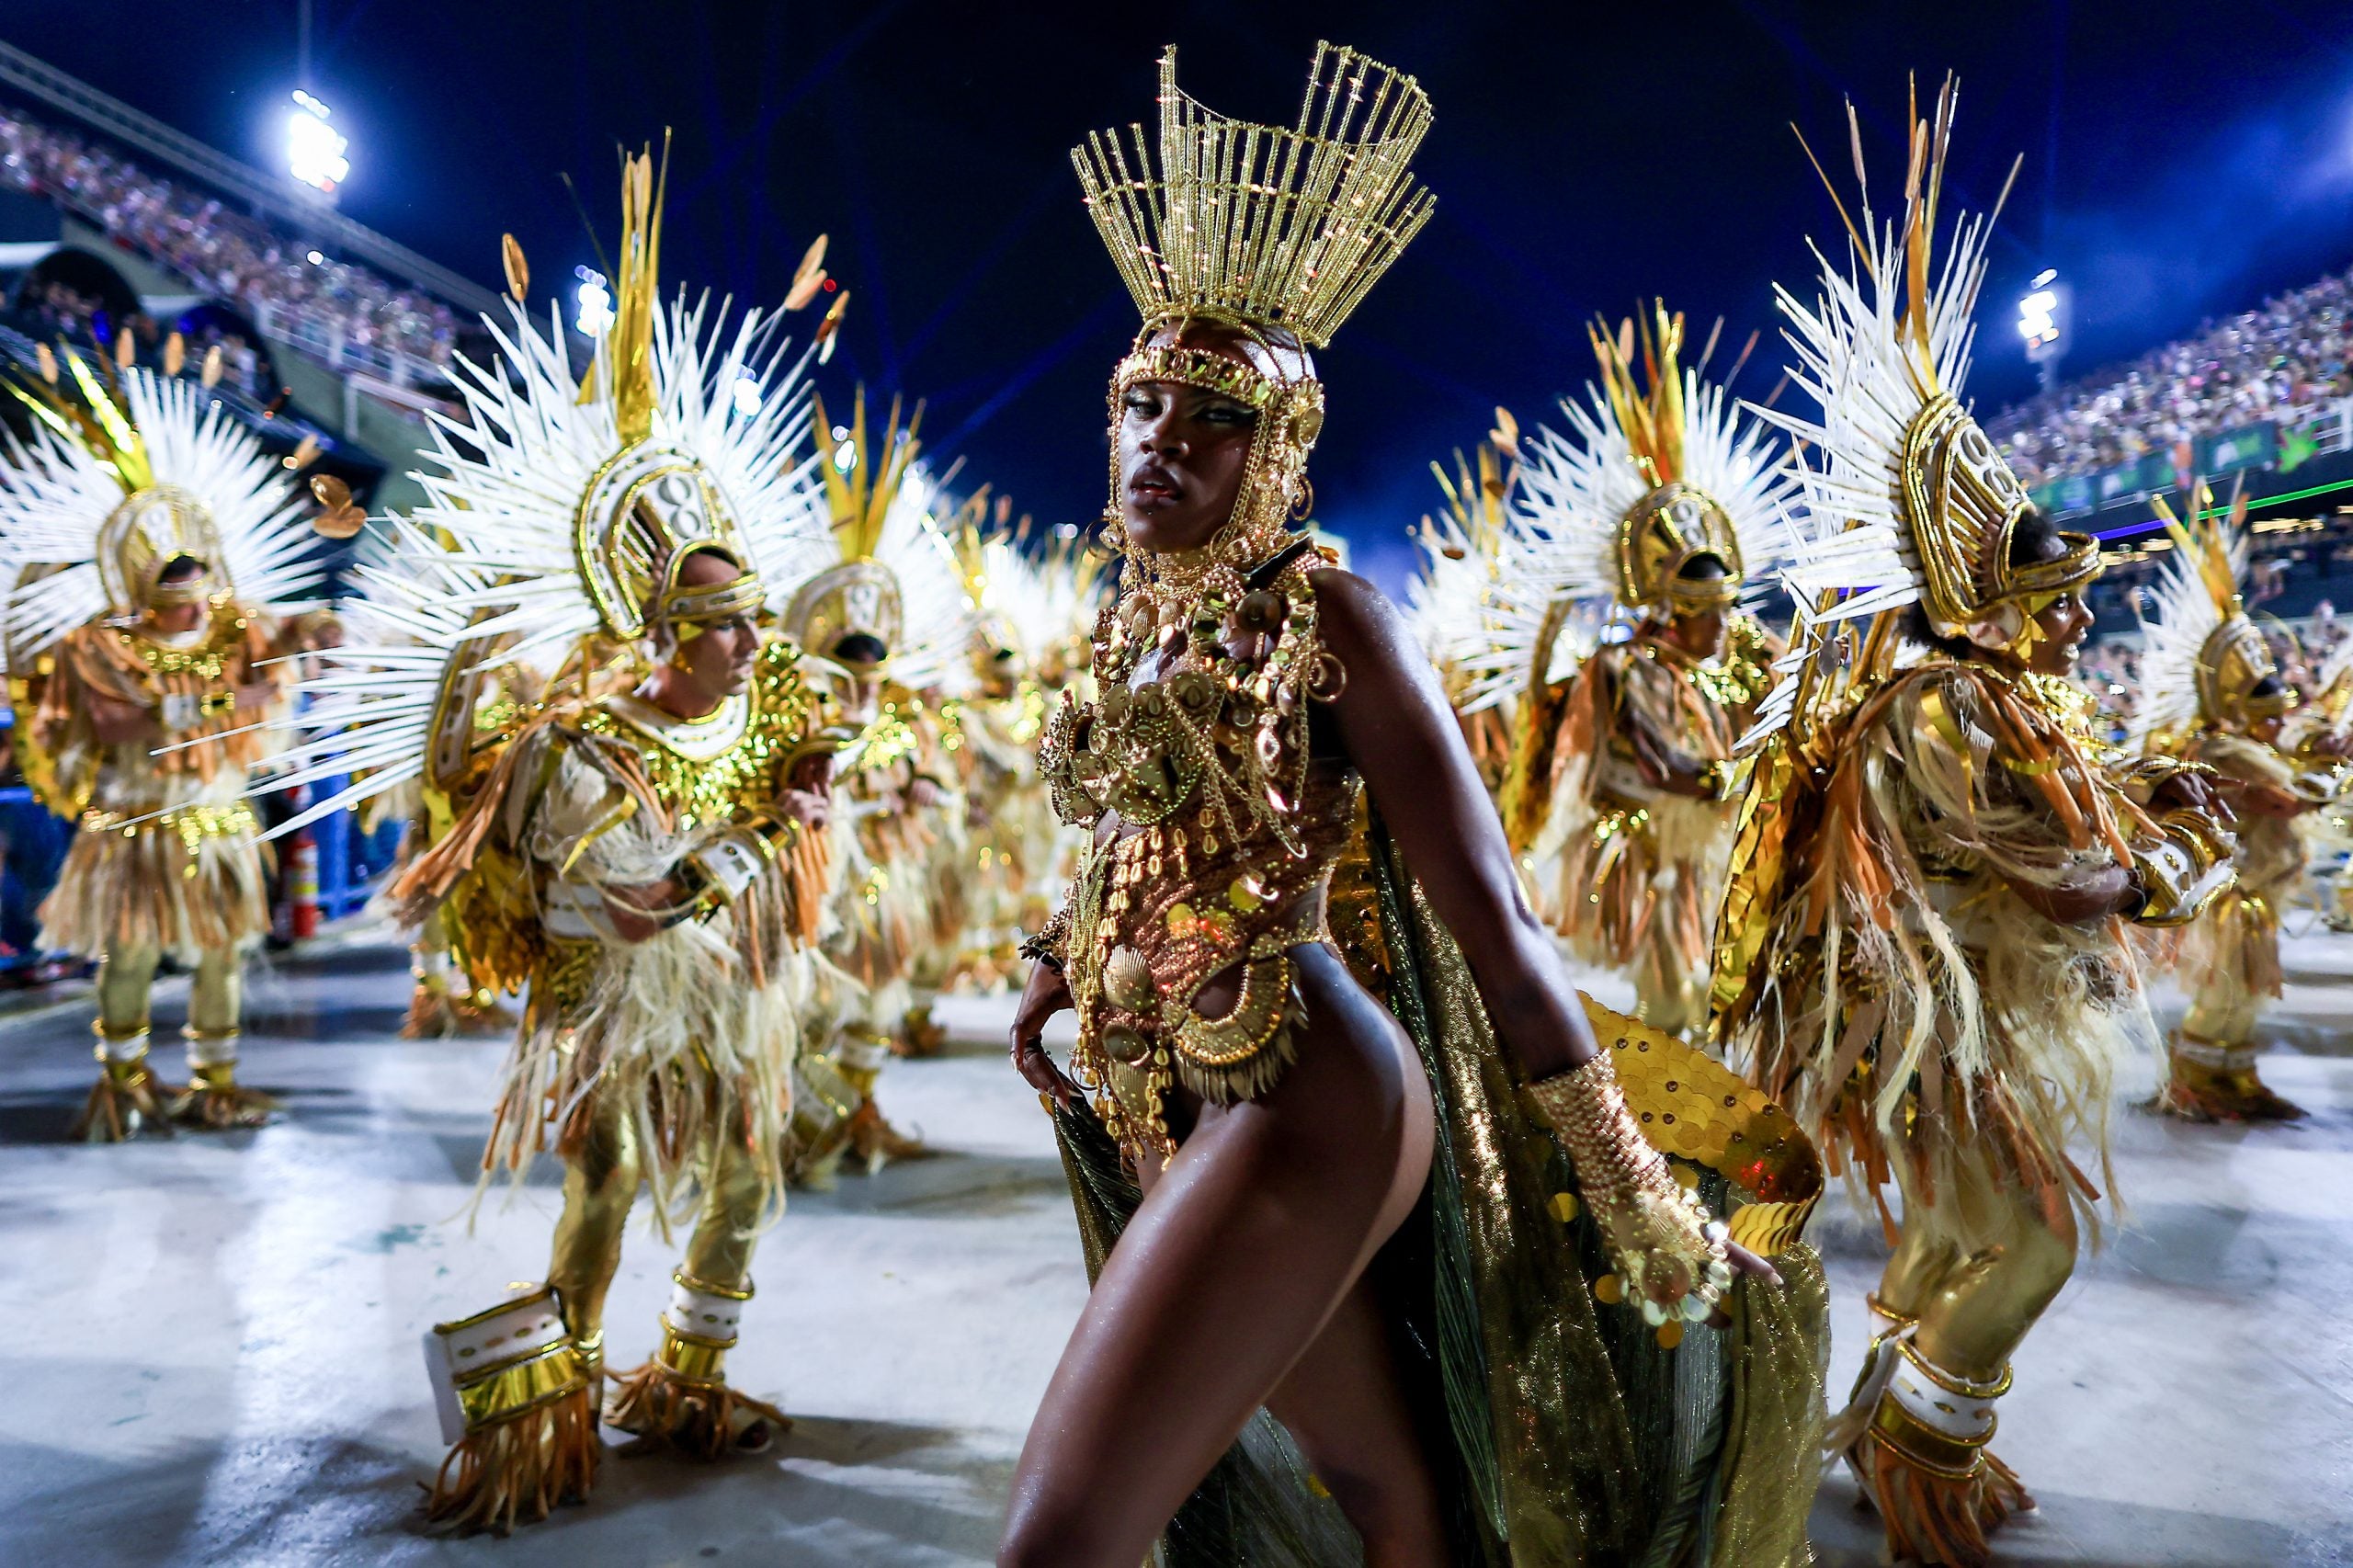 I Went To Carnival In Brazil For The First Time And Highly Recommend You Add It To Your Travel Bucket List